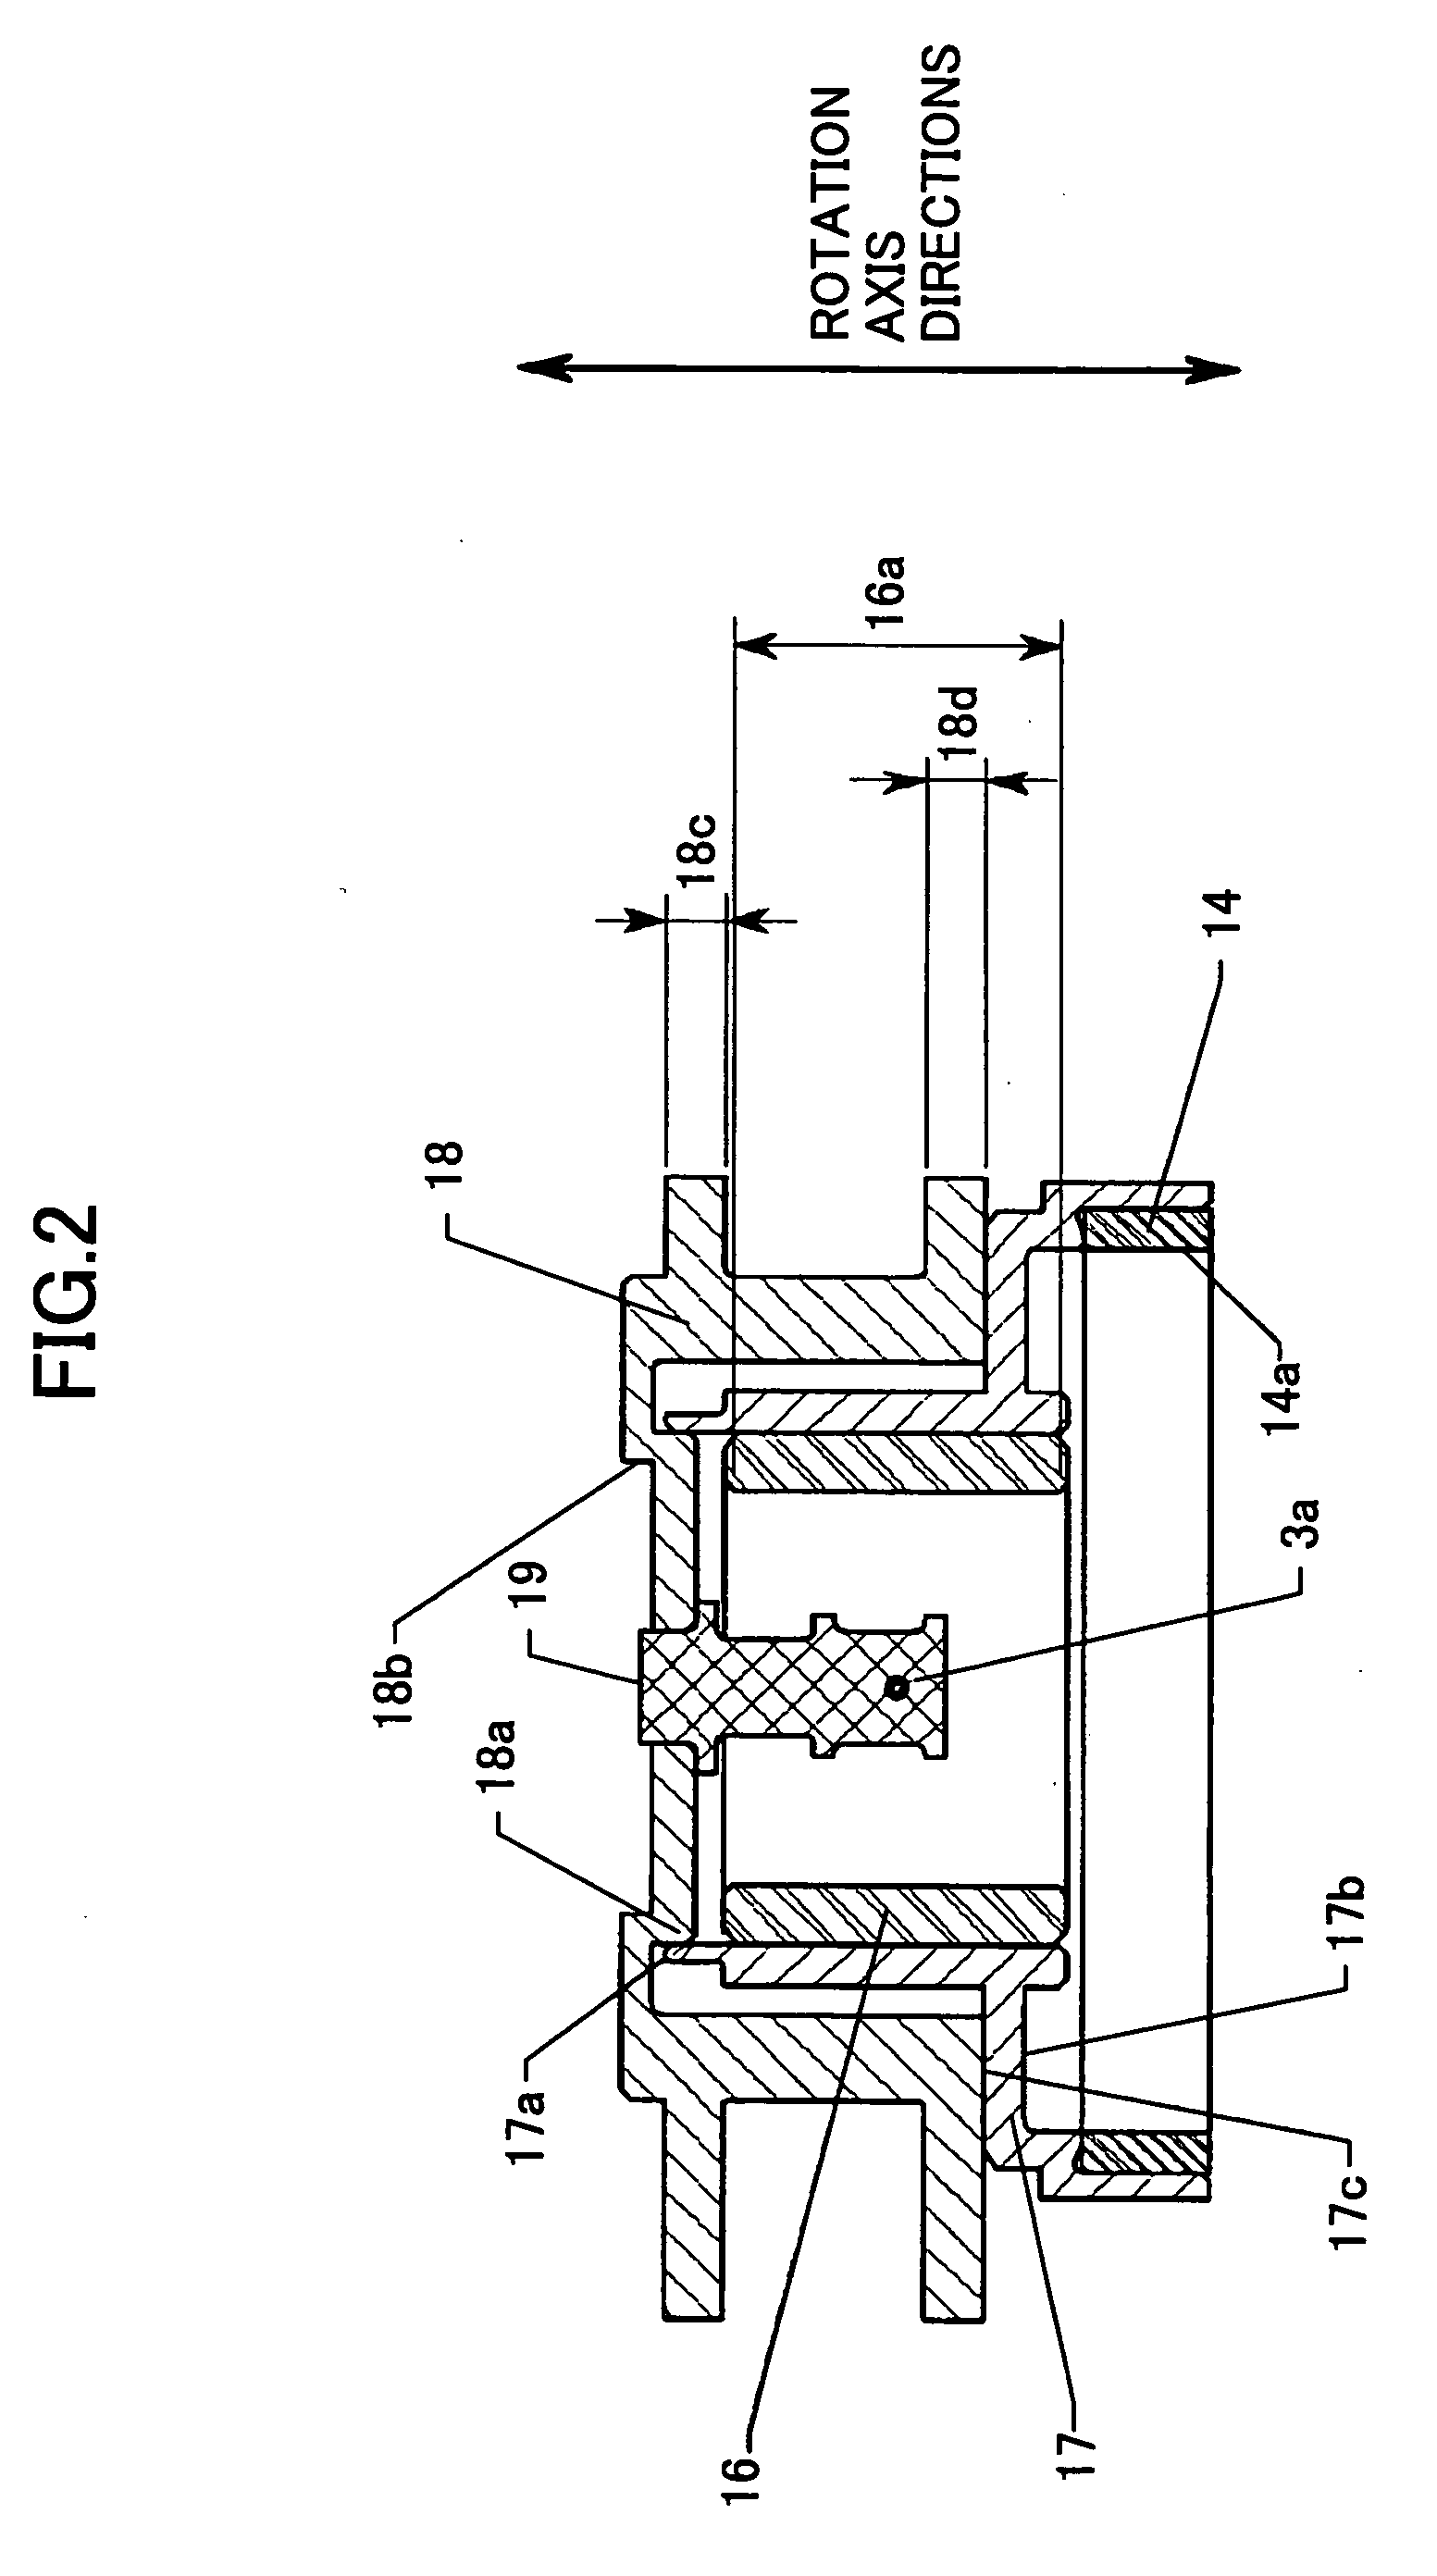 DC brushless motor, light deflector, optical scanning device, and image forming apparatus